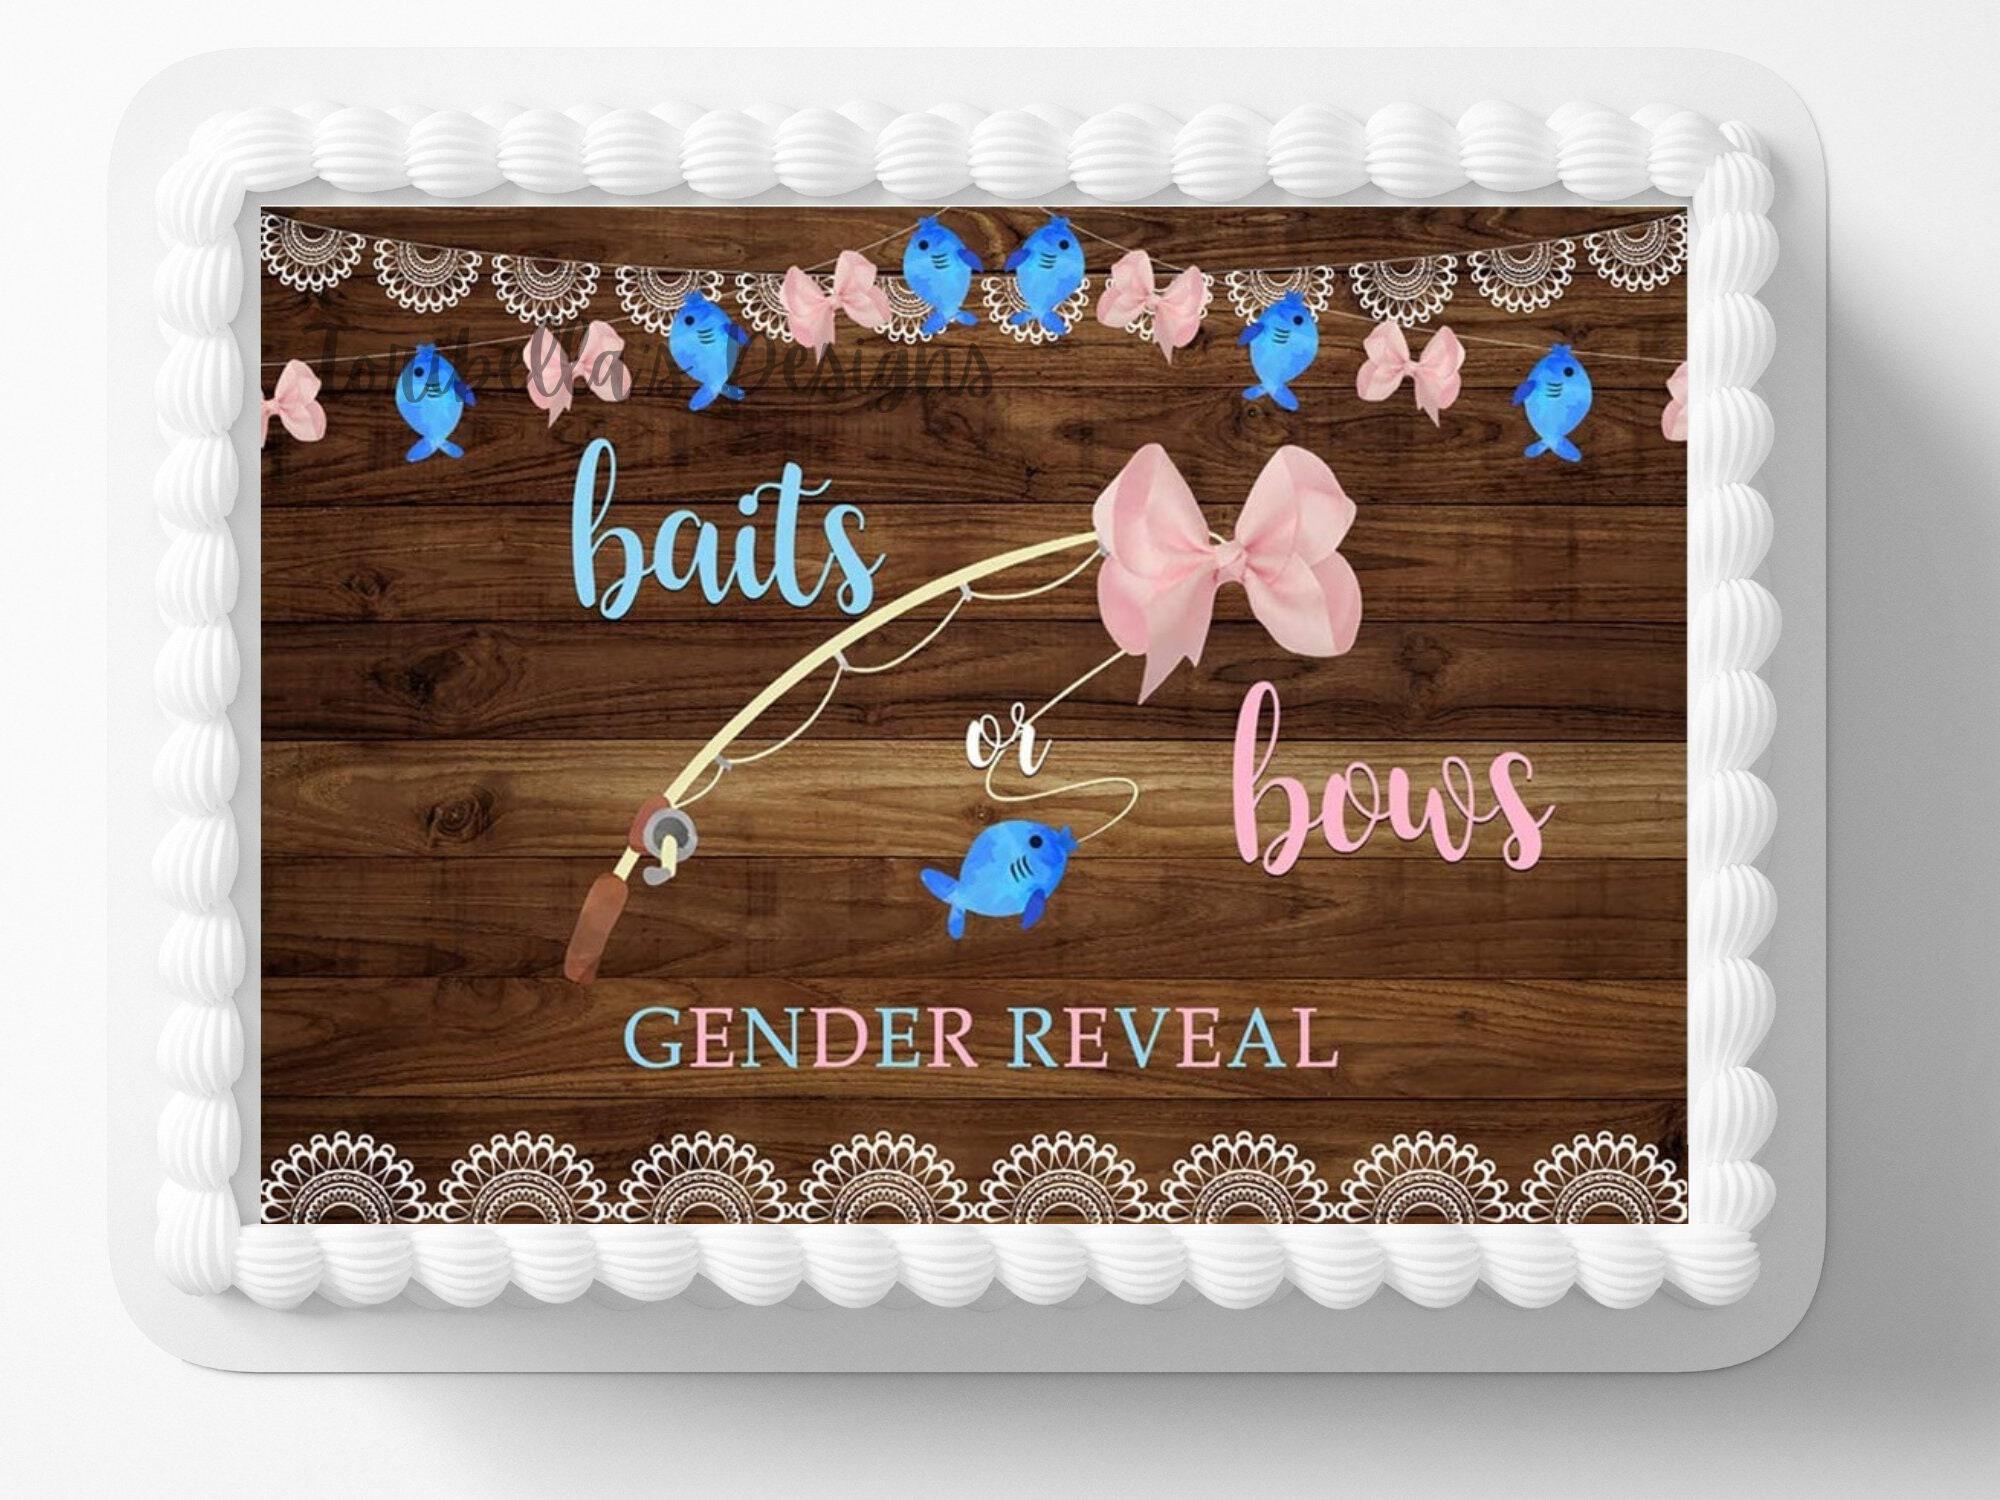 Gender Reveal Baits Or Bows Edible Image Fishing Theme Party Cake Topper  Frosting Sheet Icing Frosting Edible Sticker Easy To Apply Decal